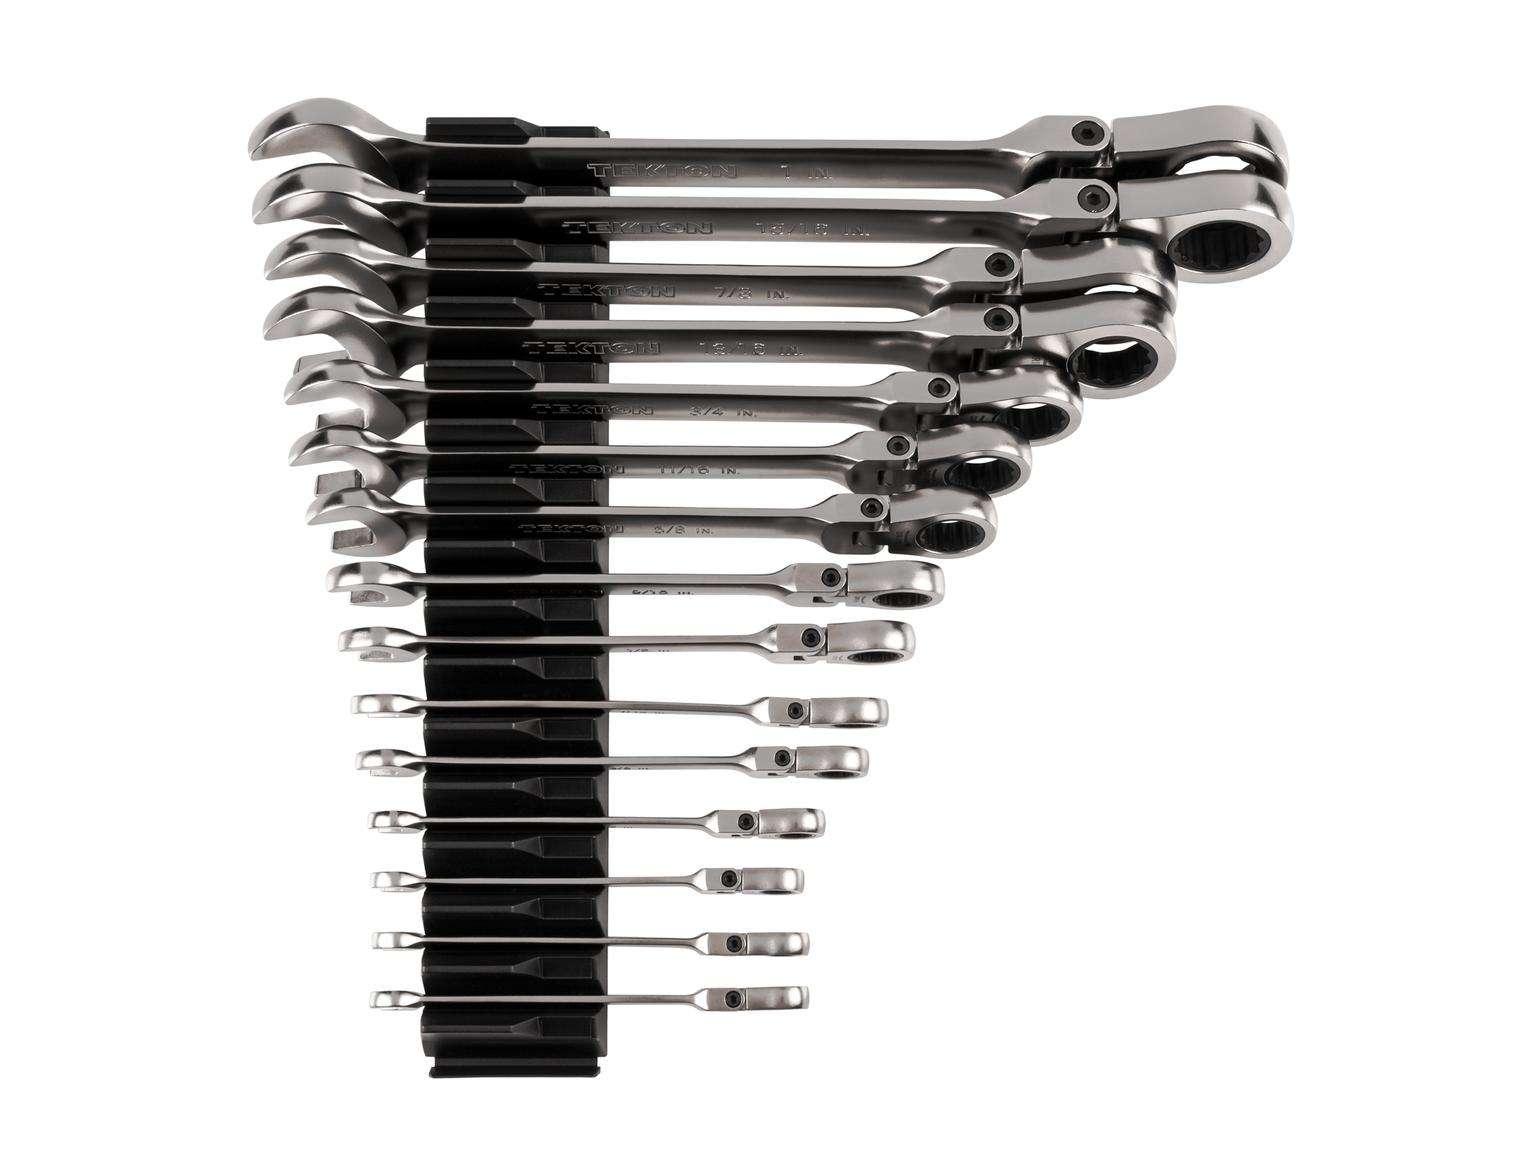 TEKTON WRC95301-T Flex Head 12-Point Ratcheting Combination Wrench Set with Modular Slotted Organizer, 15-Piece (1/4-1 in.)